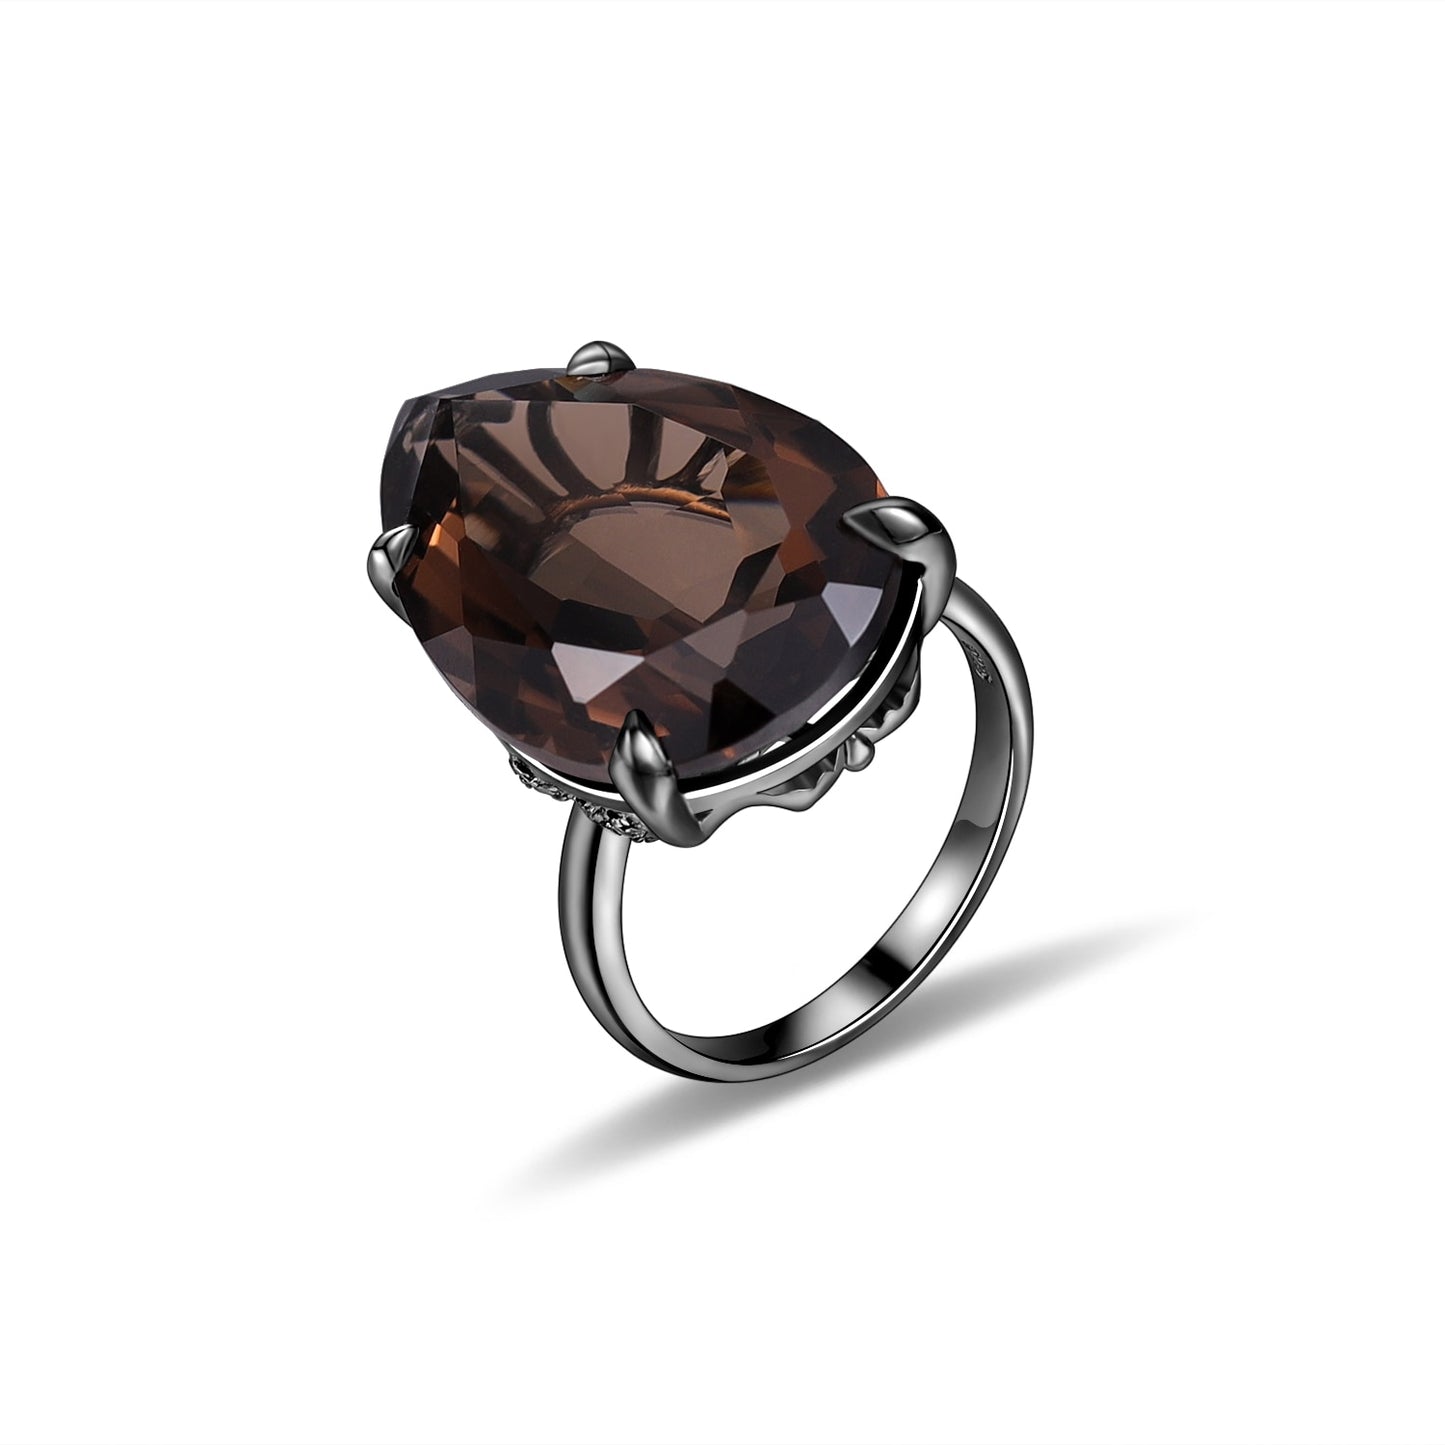 GEM&#39;S BALLET Brown Healing Stones Cockail Rings Natural Smoky Quartz Statement Ring in 925 Sterling Silver Gift For Her Sky Blue Topaz|925 Sterling Silver